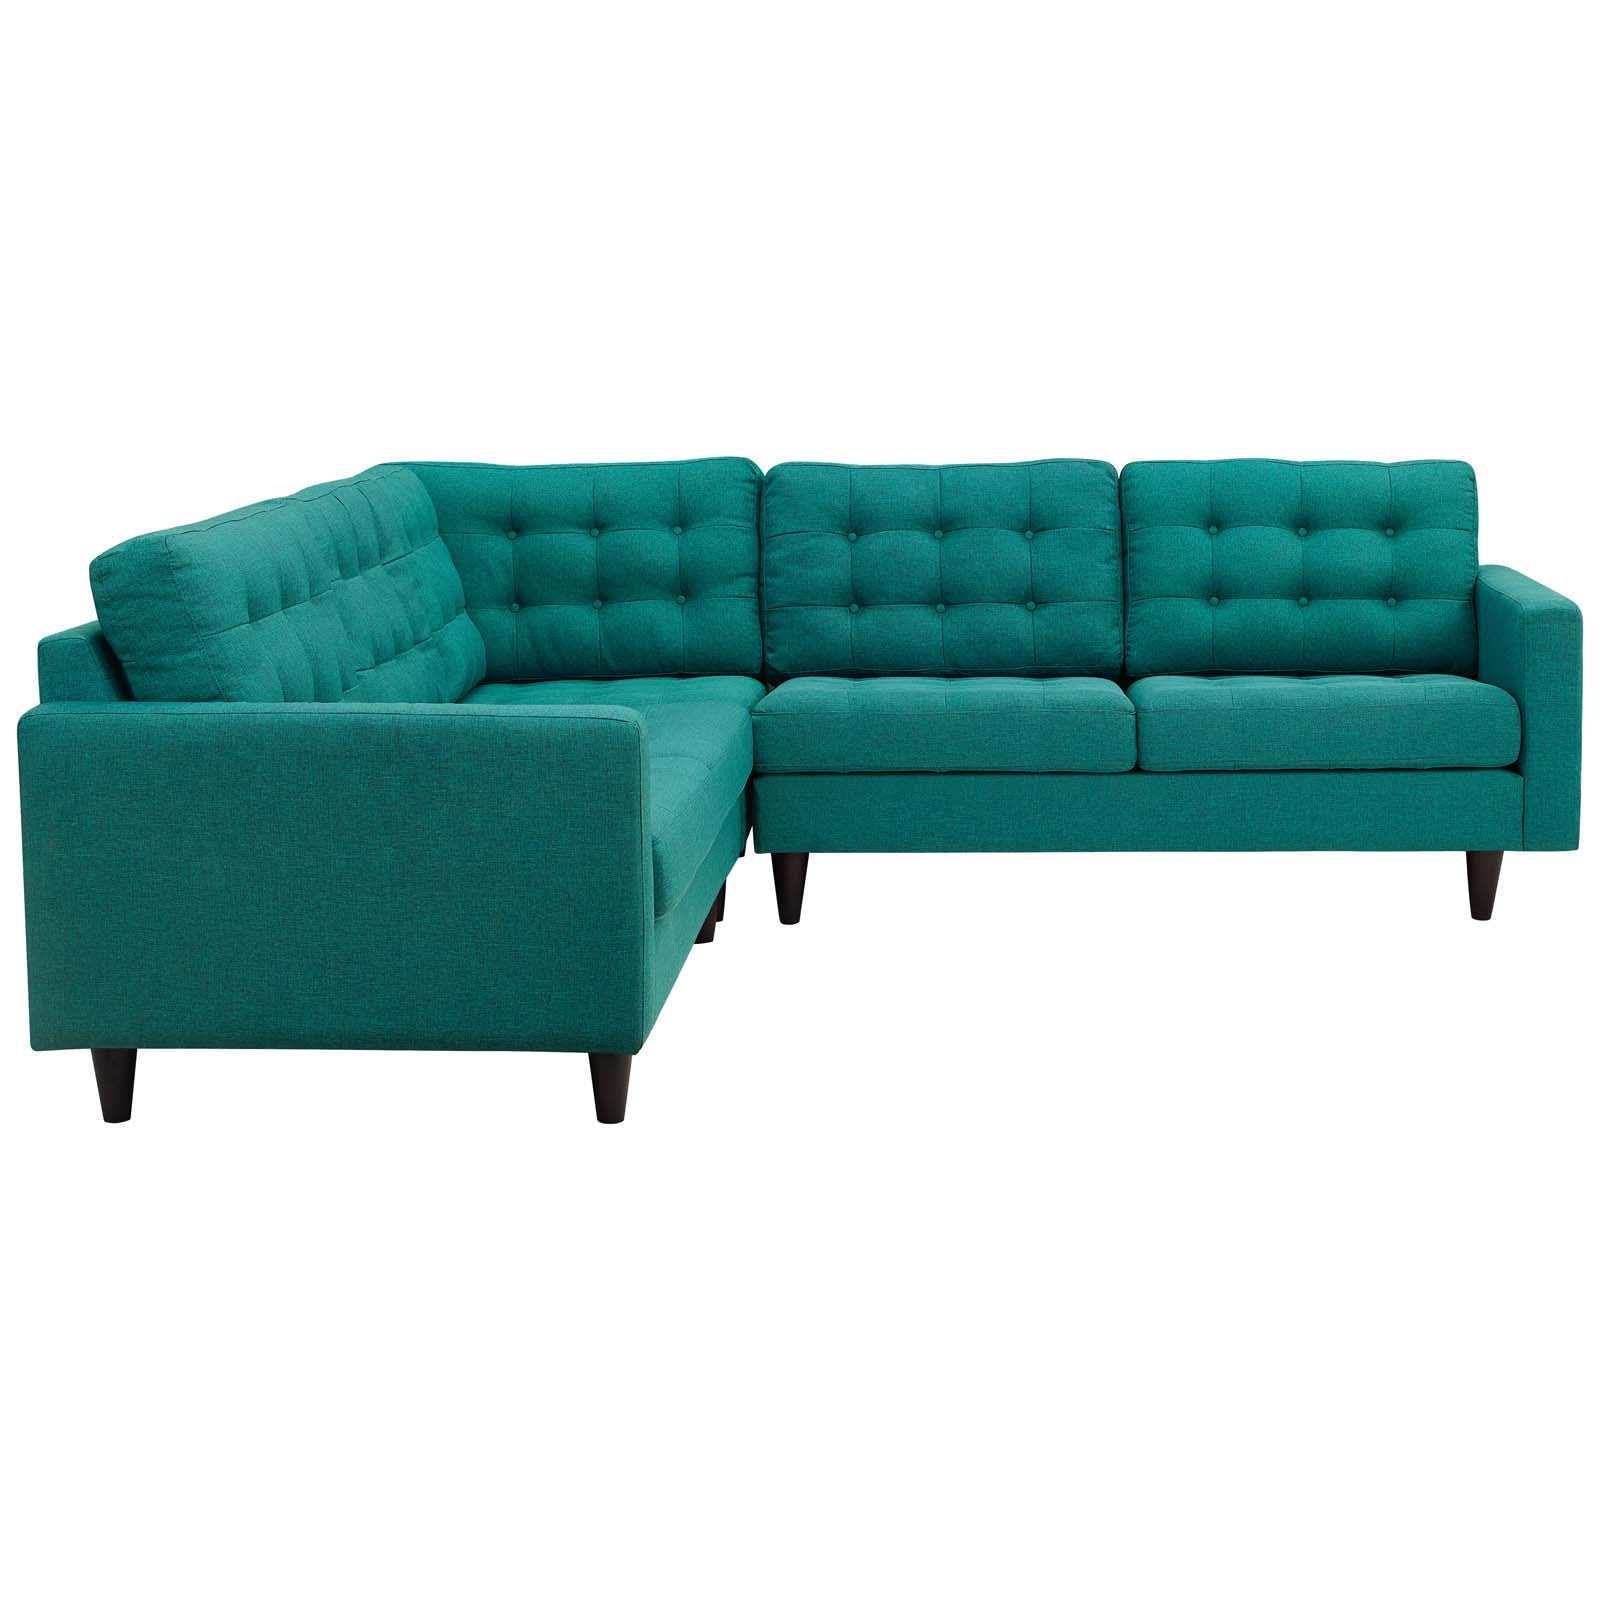 Modway Sectional Sofas - Empress 3 Piece Upholstered Fabric Sectional Sofa Set Teal